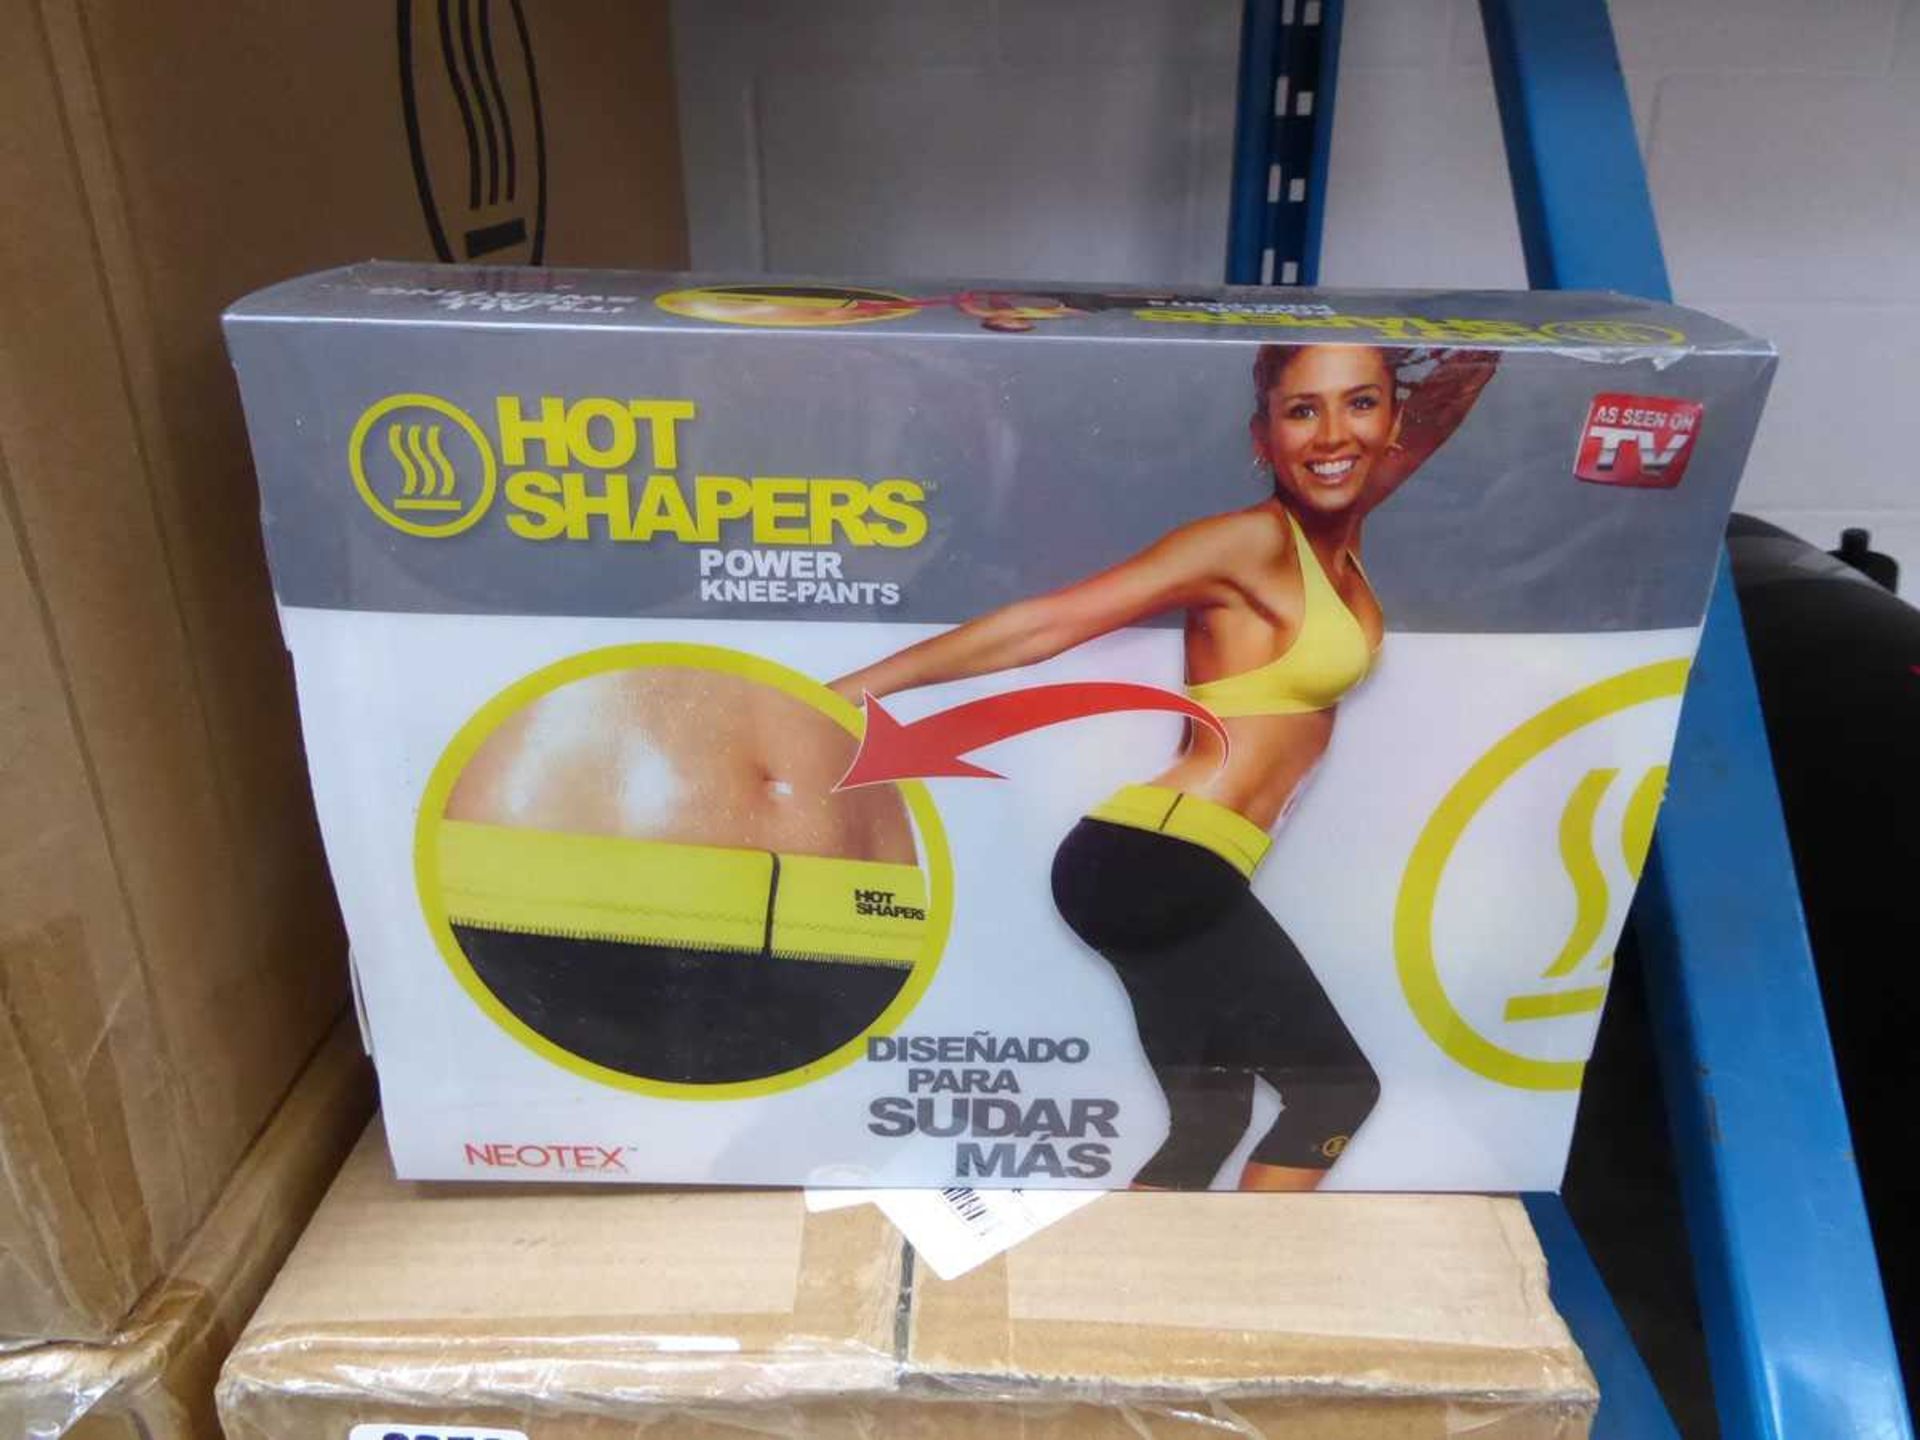 Box containing 20 pairs of hot shapers fitness power knee pant sets - Image 2 of 2